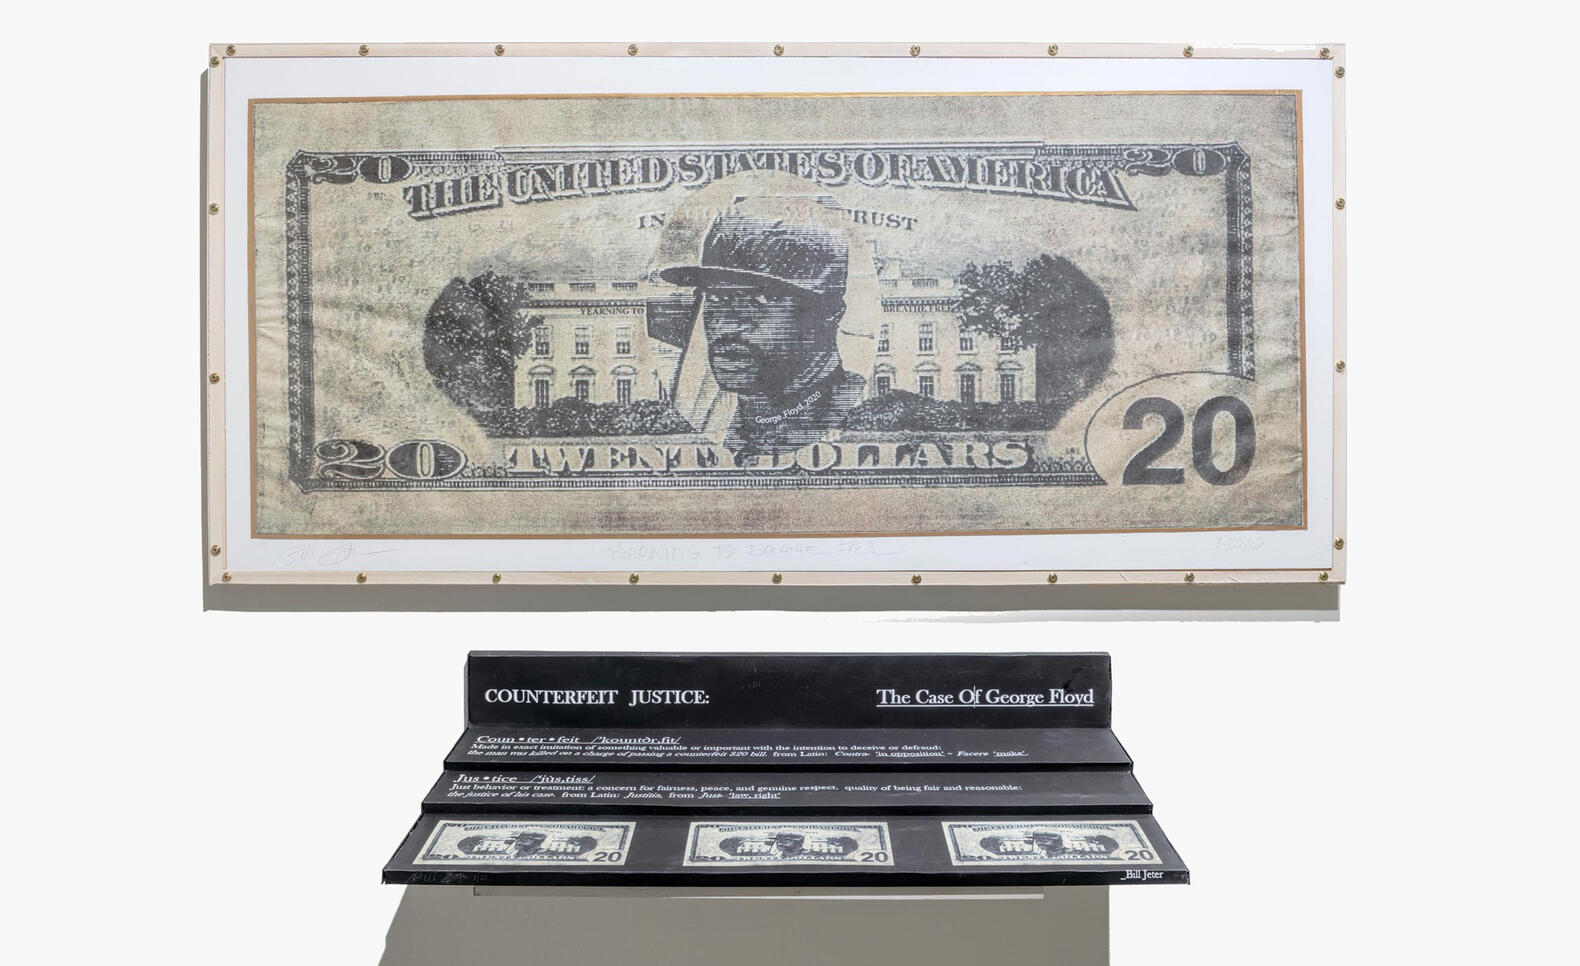 Image of a 20 dollar bill with George Floyd's portrait, lithograph print ; Bill Jeter